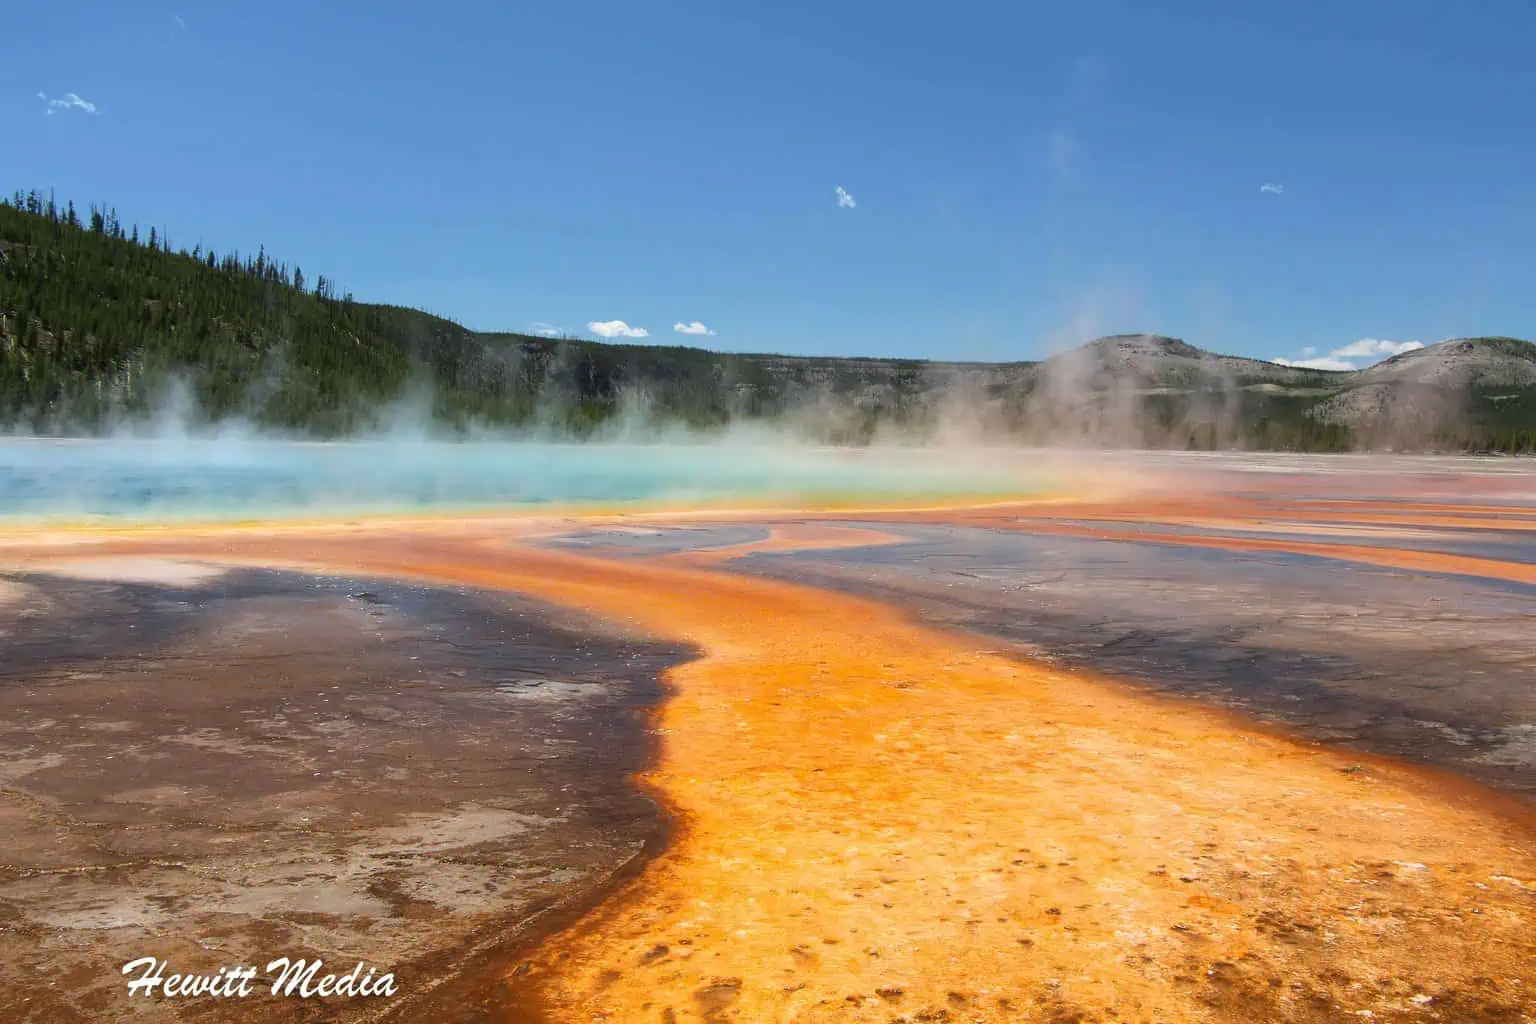 Visiting the United States - Yellowstone National Park